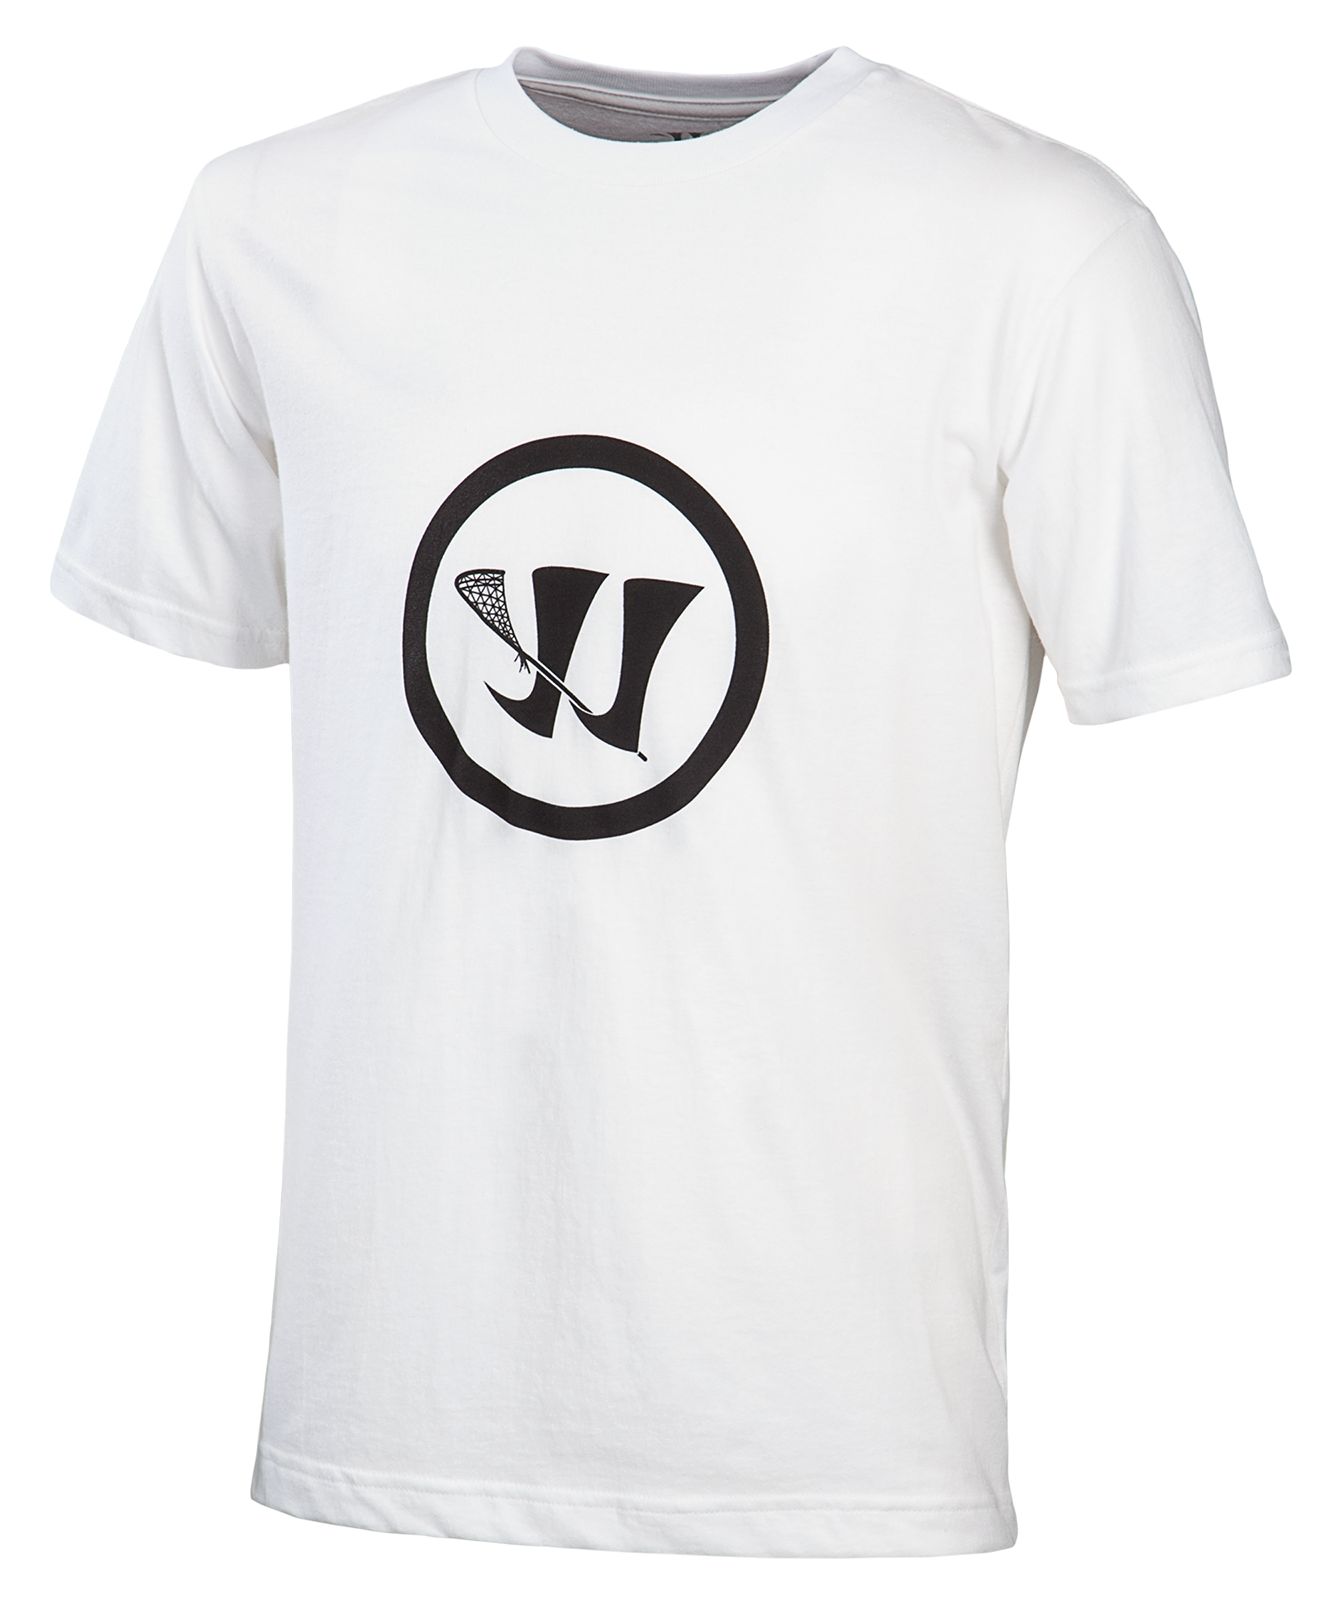 Youth Crease Tee,  image number 1